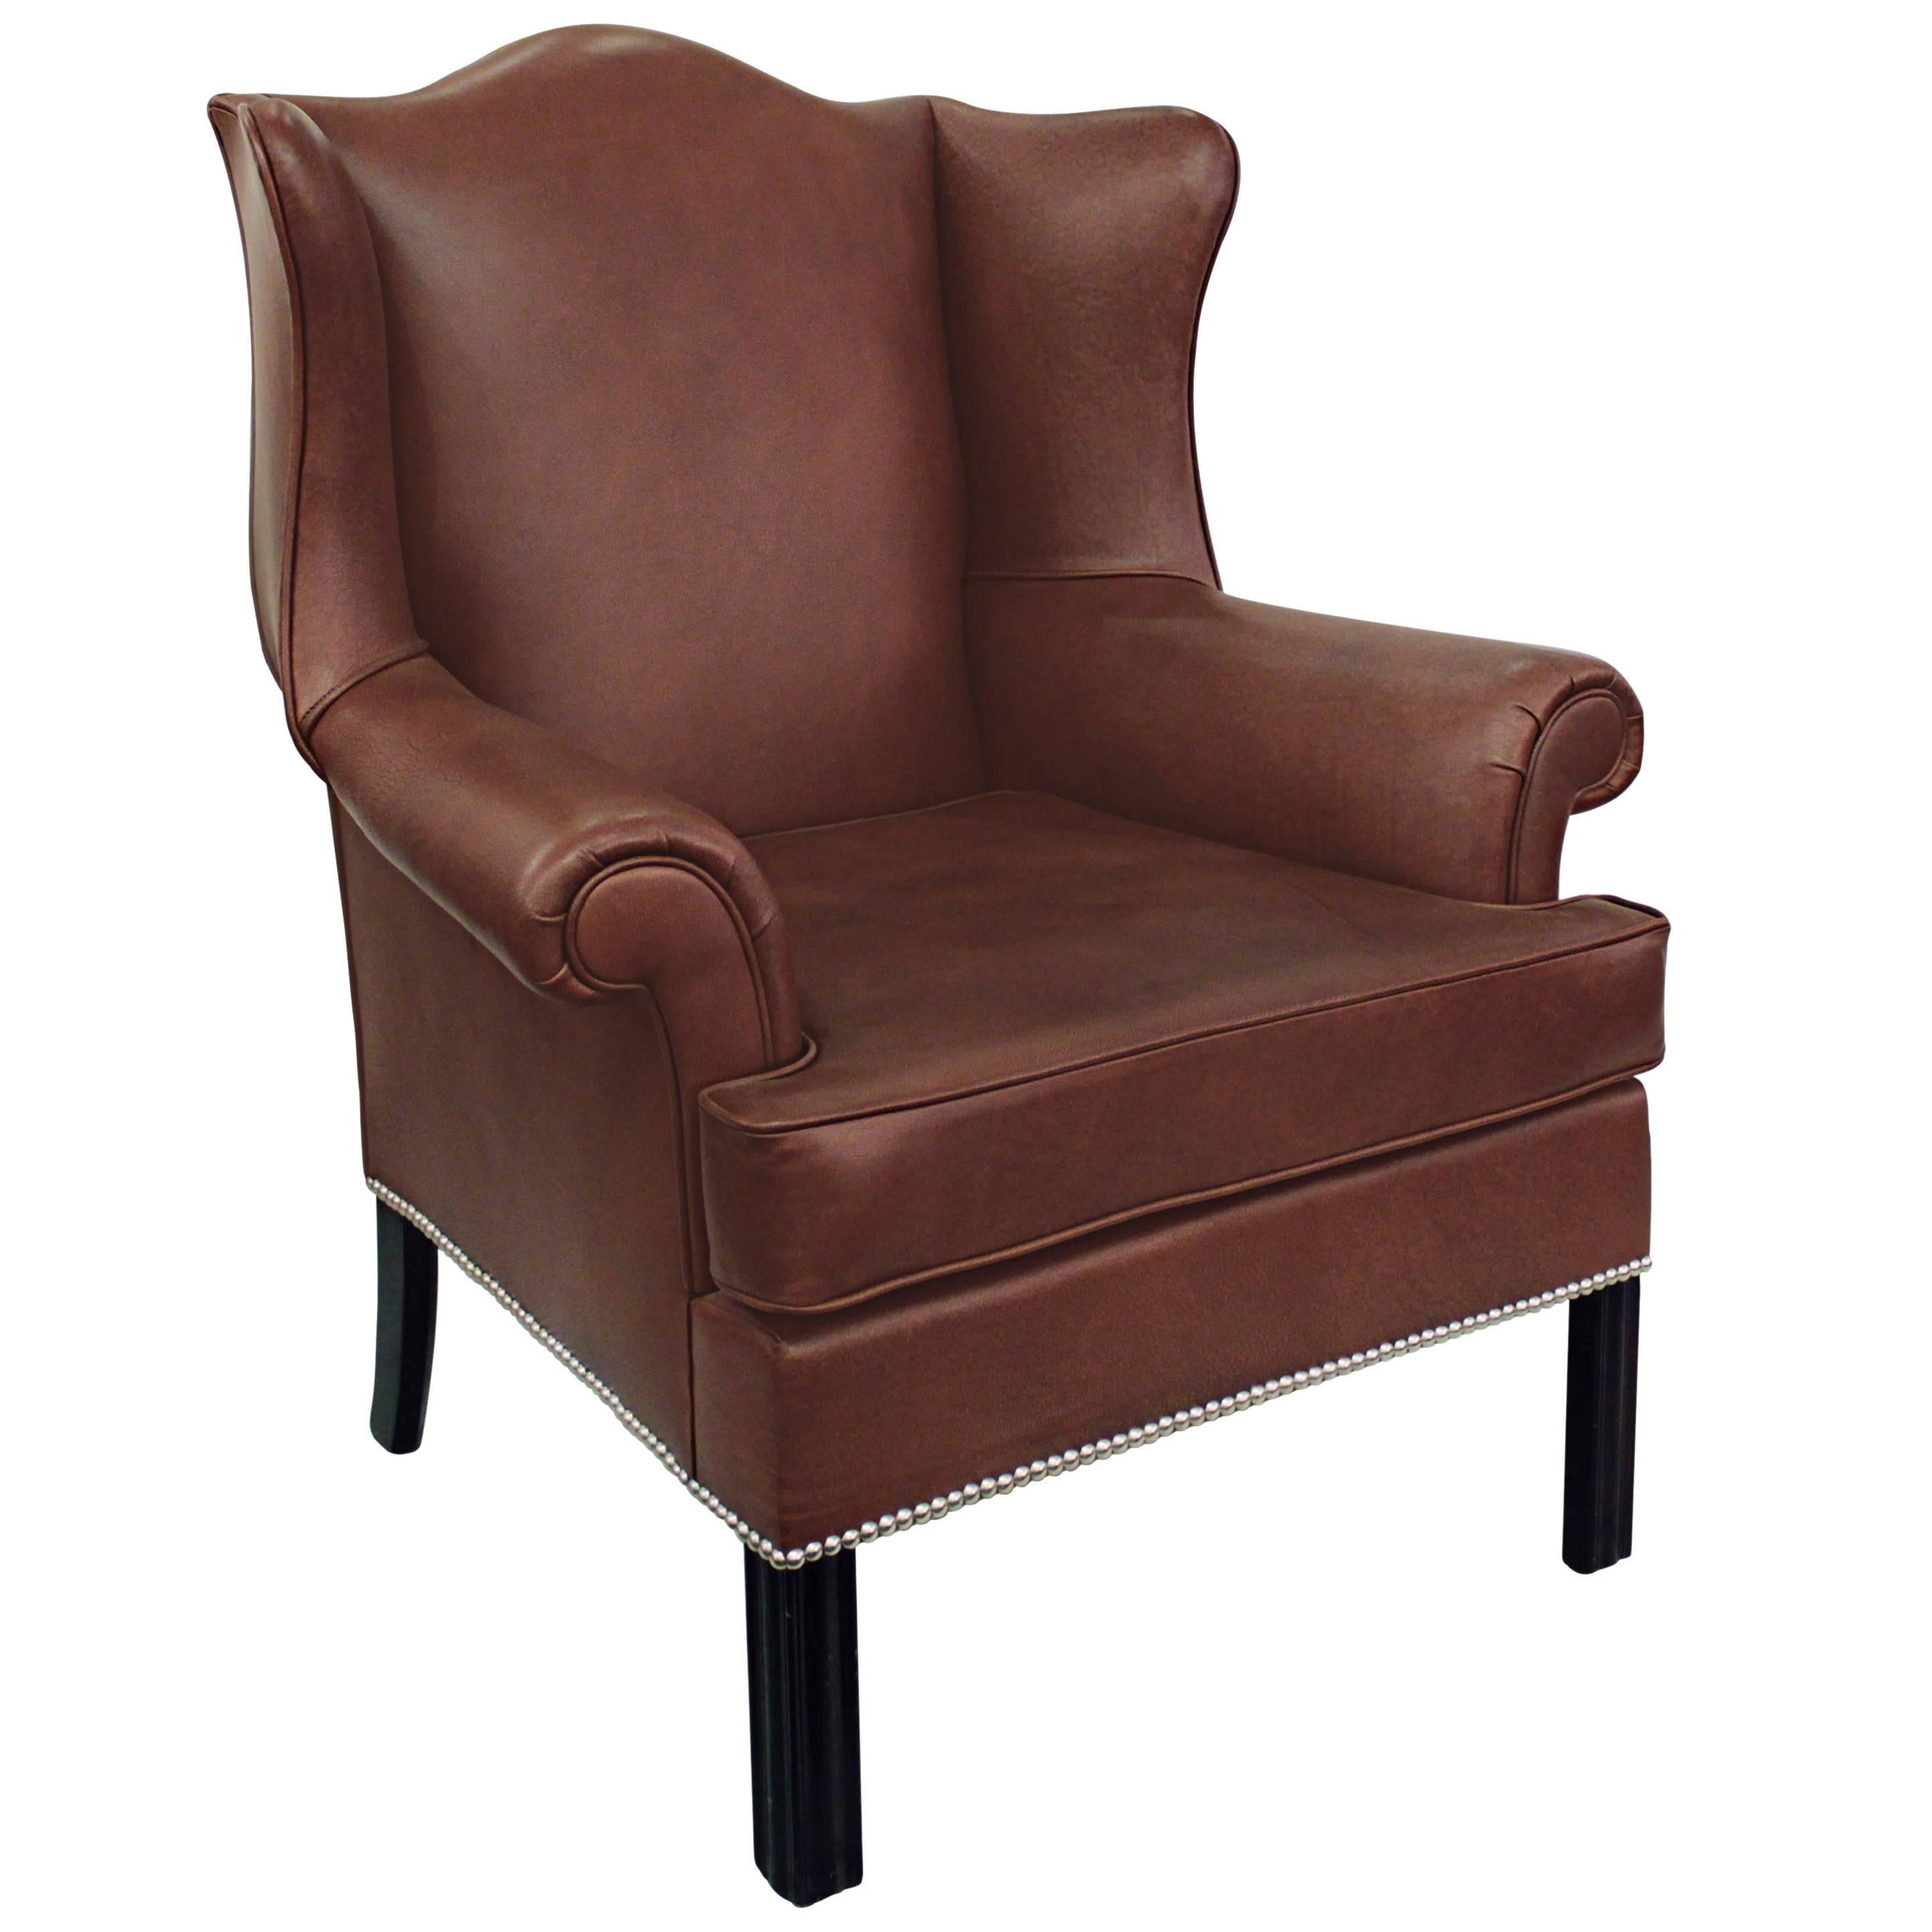 Small-Scale Leather Wing Chair by Edward Wormley for Dunbar